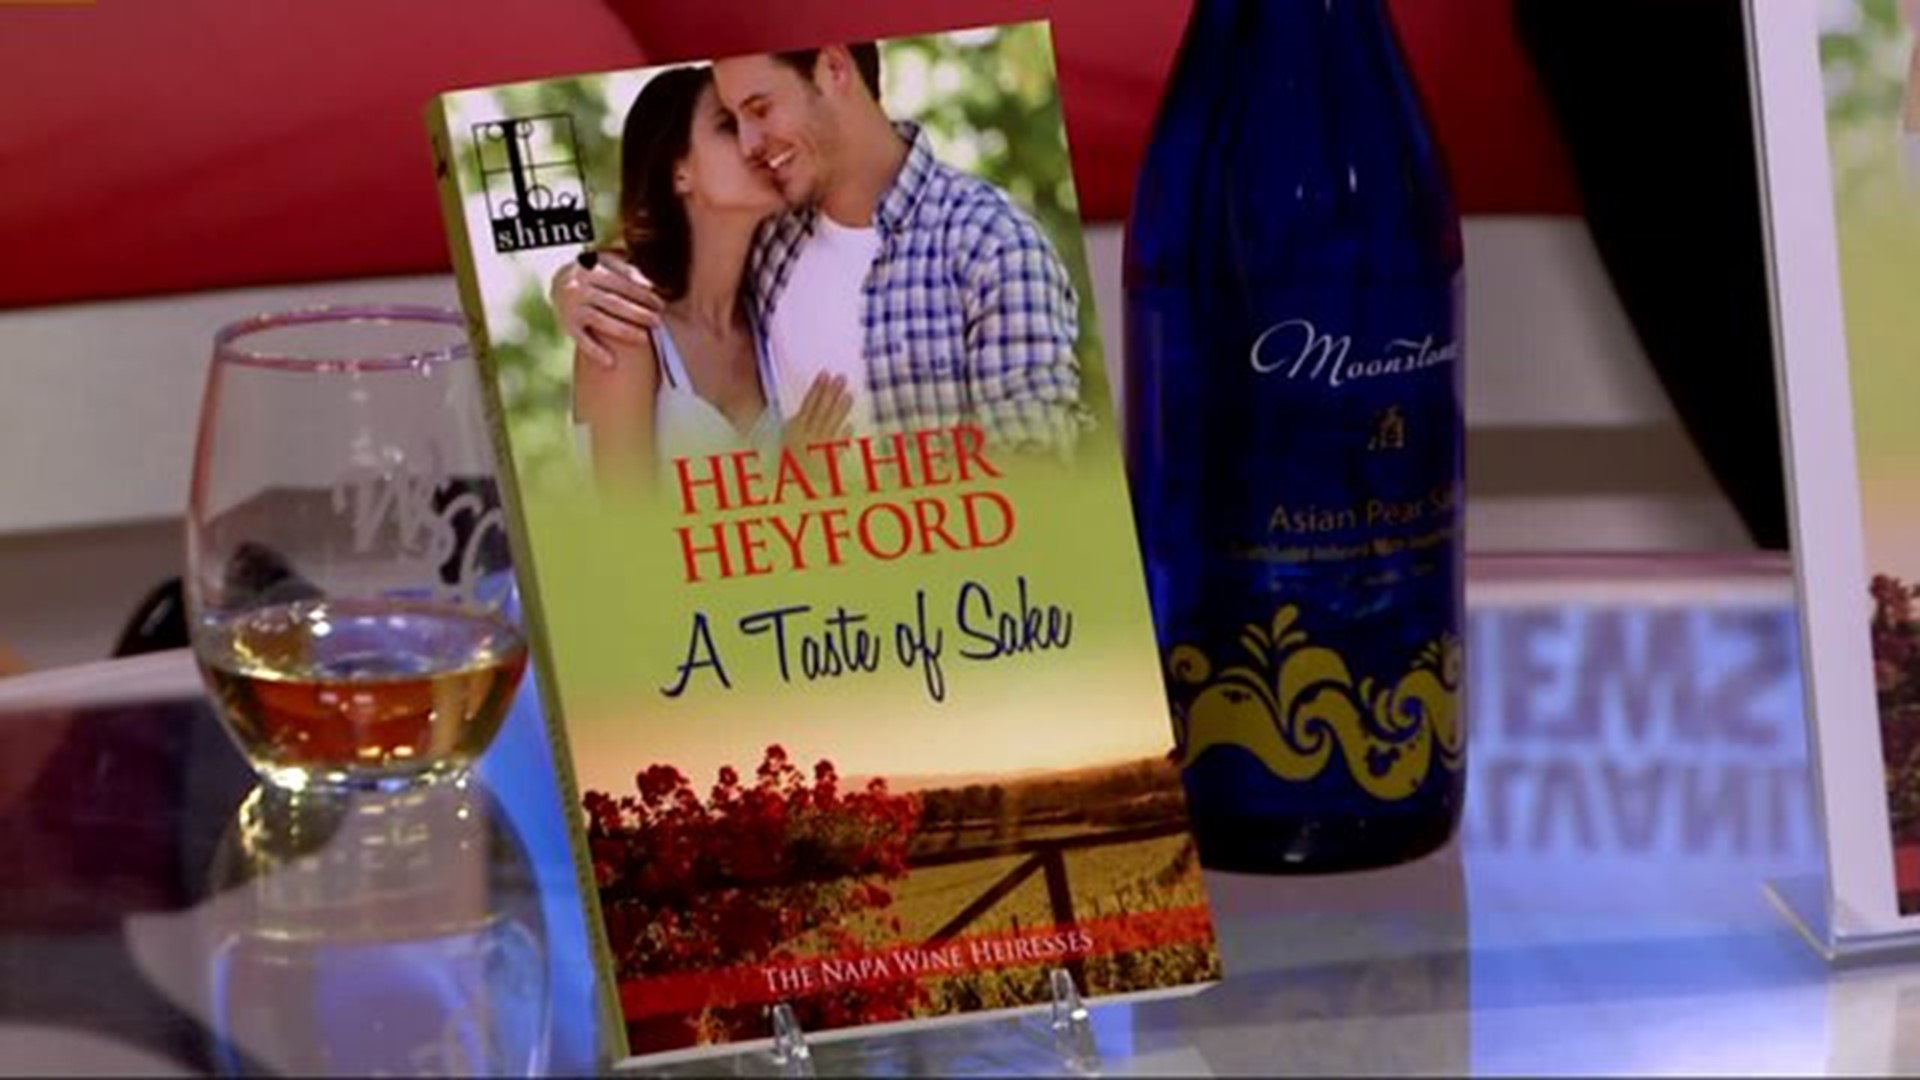 Curl up with a Napa Wine Heiress romance novel this fall